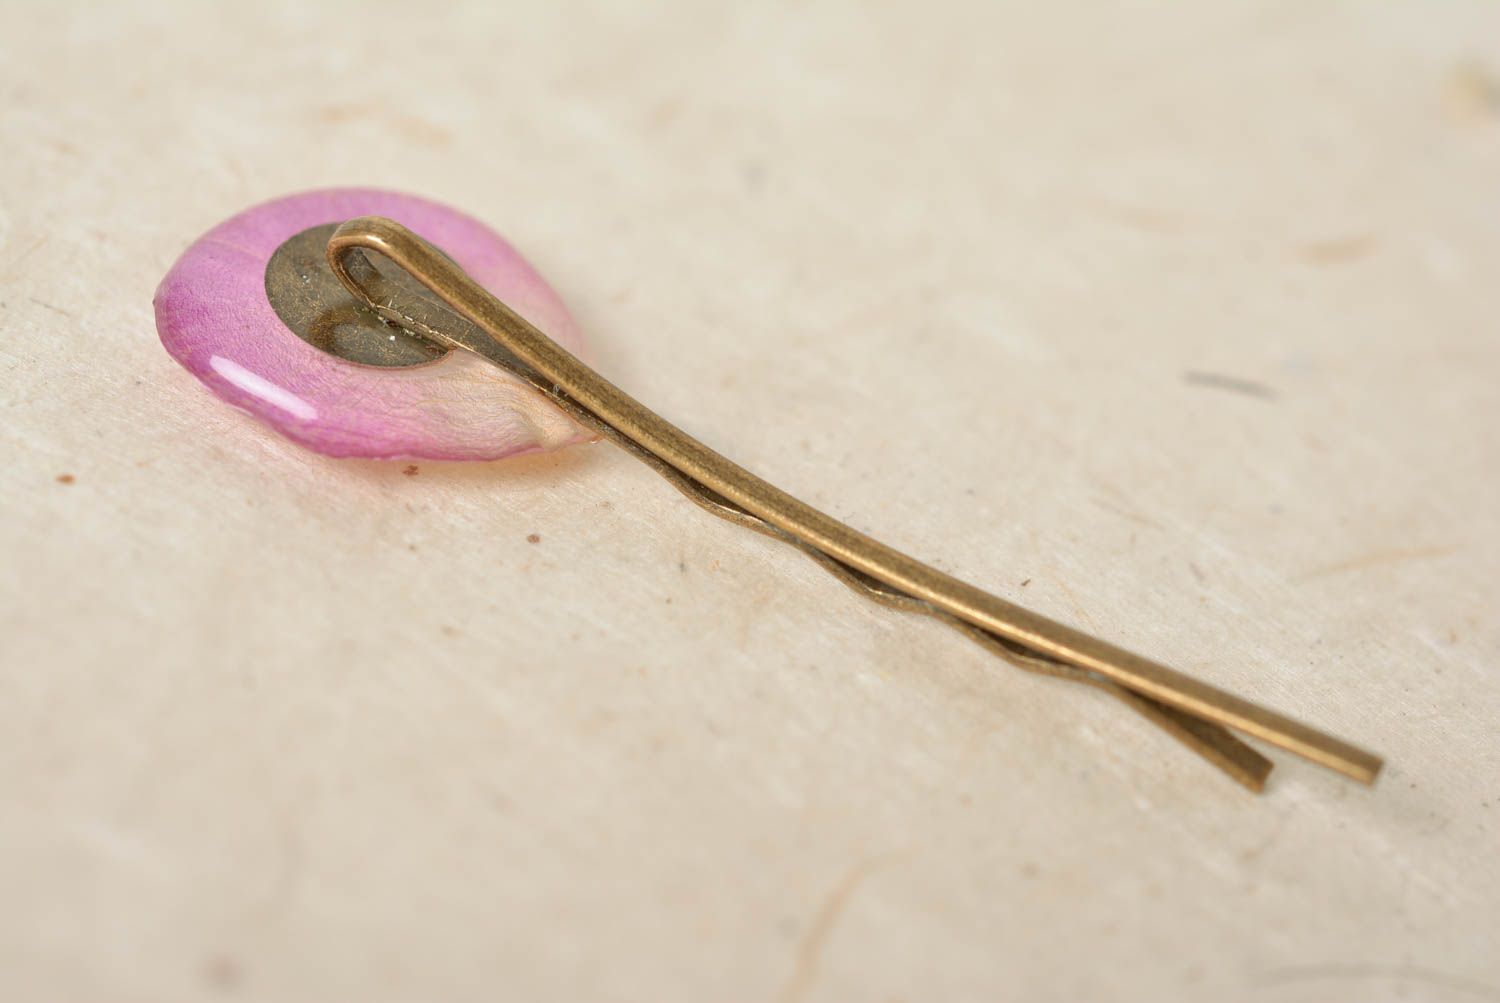 Handmade decorative metal hair pin with dried flower petal in epoxy resin photo 2